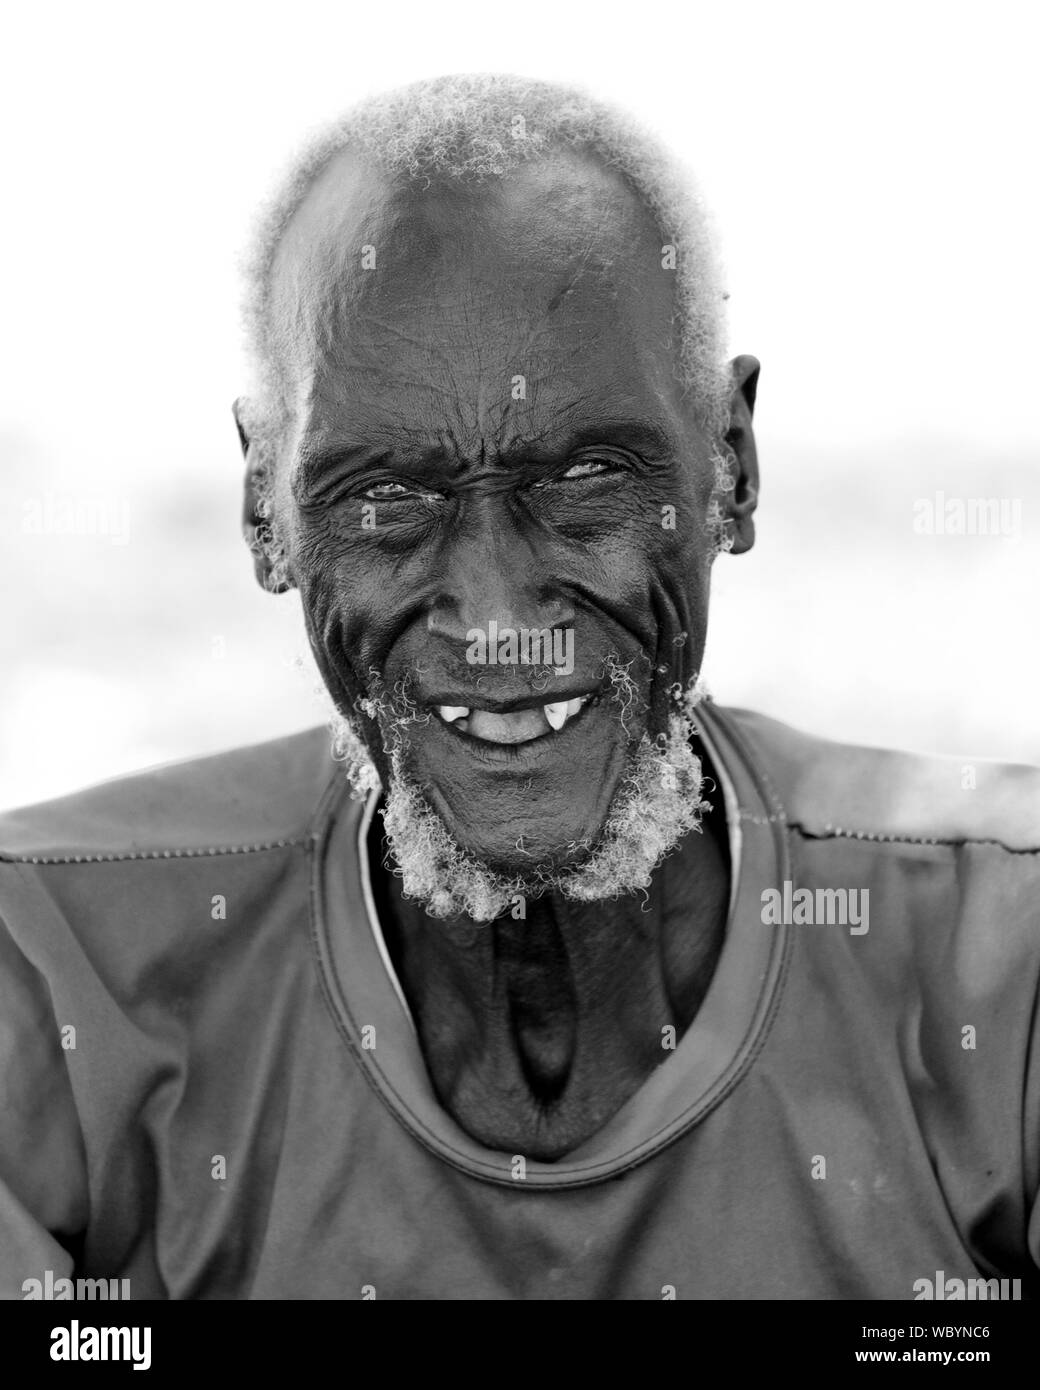 PANWELL, SOUTH SUDAN-DECEMBER 4, 2010: Portrait of an unidentified man of the Dinka tribe in rural South Sudan. Stock Photo